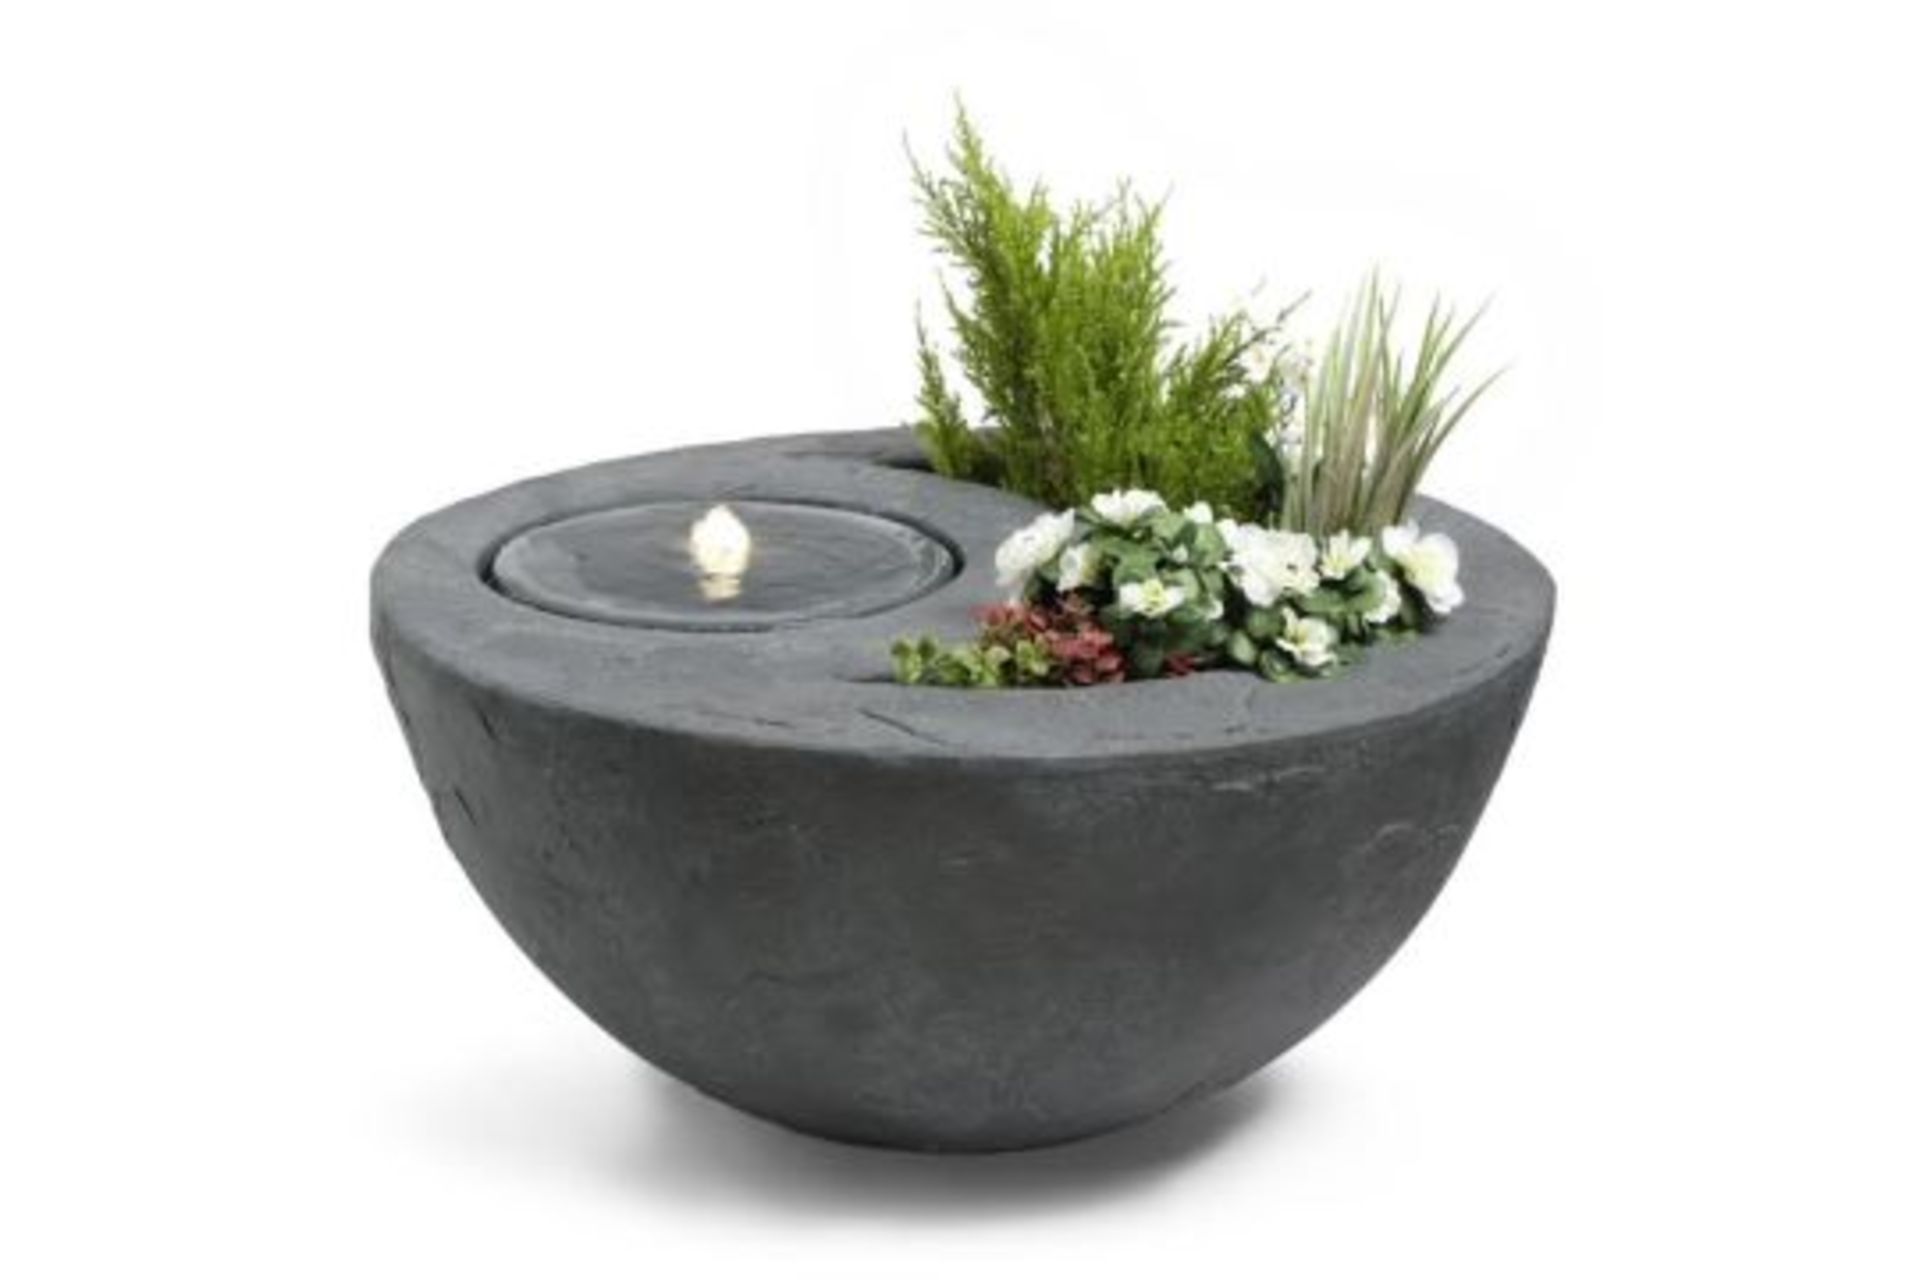 New & Boxed Dual Water Feature and Planter - Garden Bowl Design Planter, Indoor/Outdoor LED Lights - Image 3 of 3